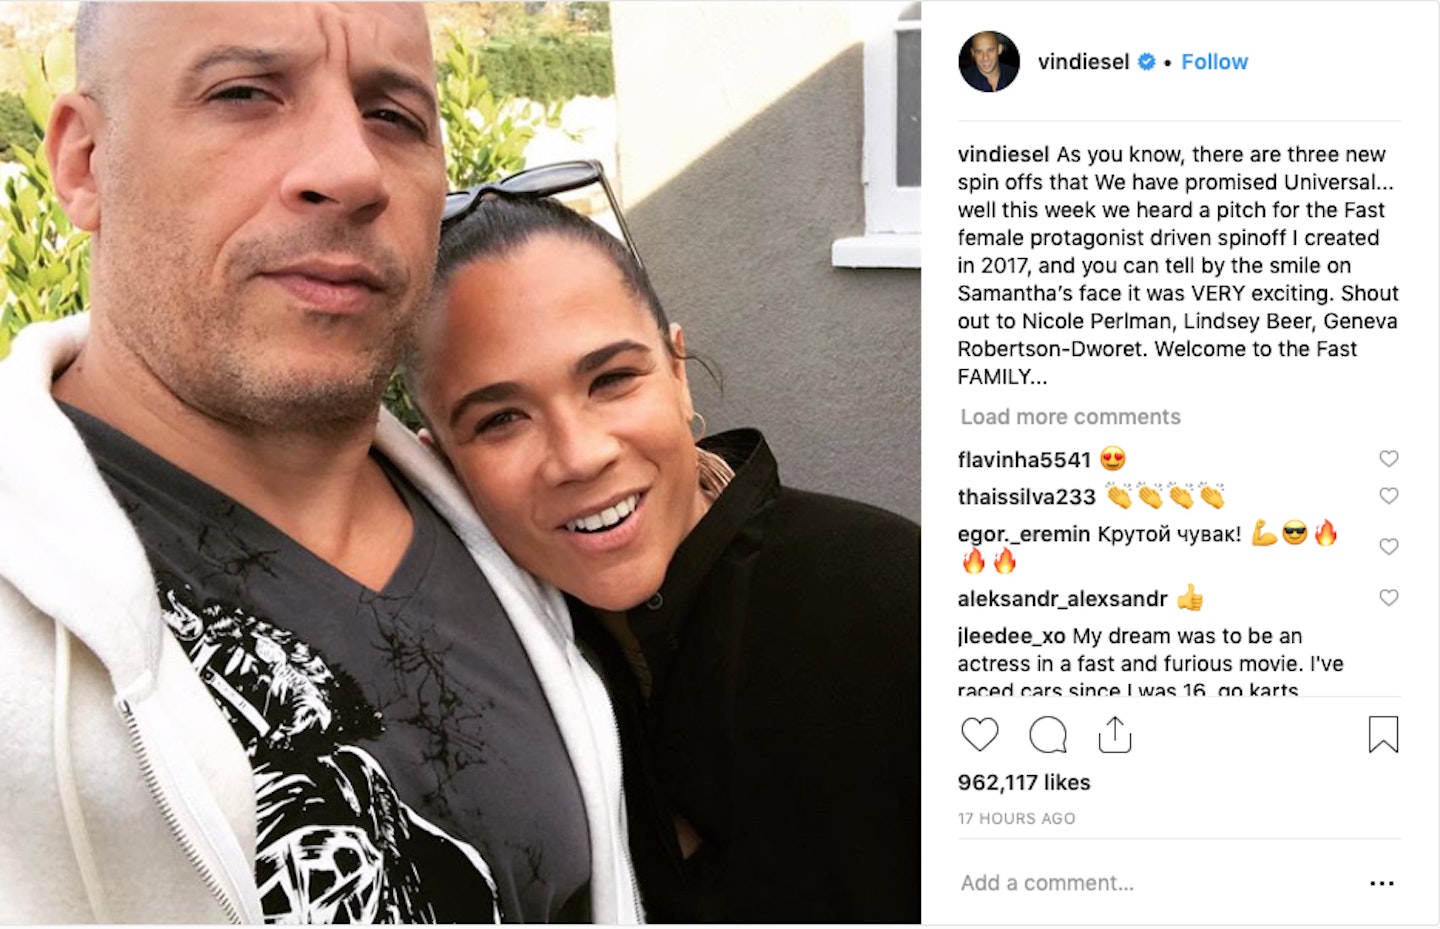 Fast & Furious female spin-off Insta post